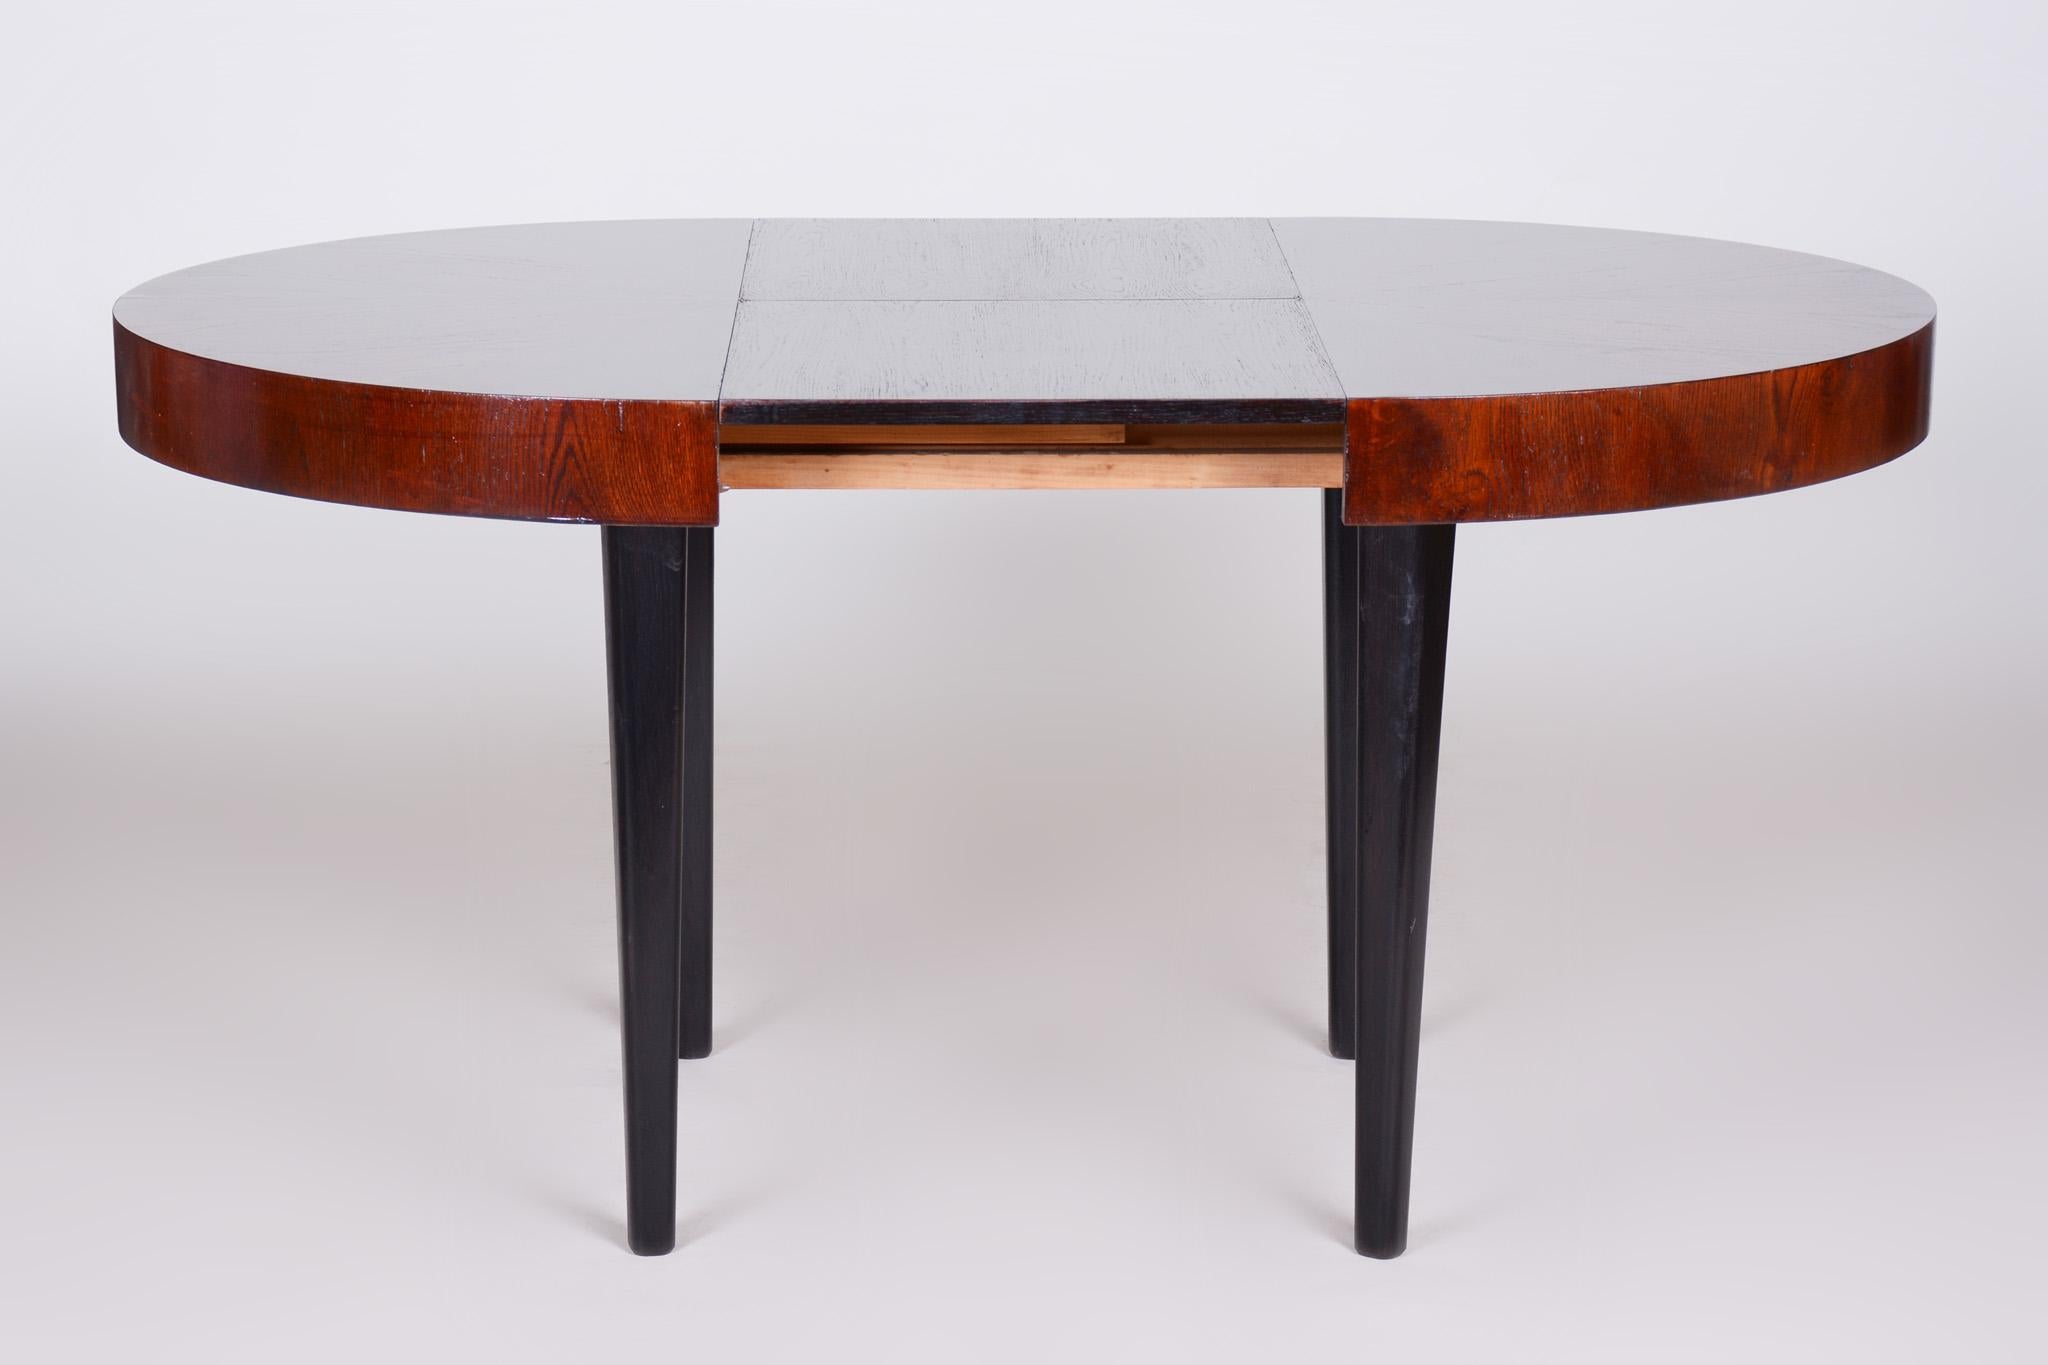 Fully Restored Art Deco Dining Table Made in the 1940s in Czechia, Beech and Oak 1